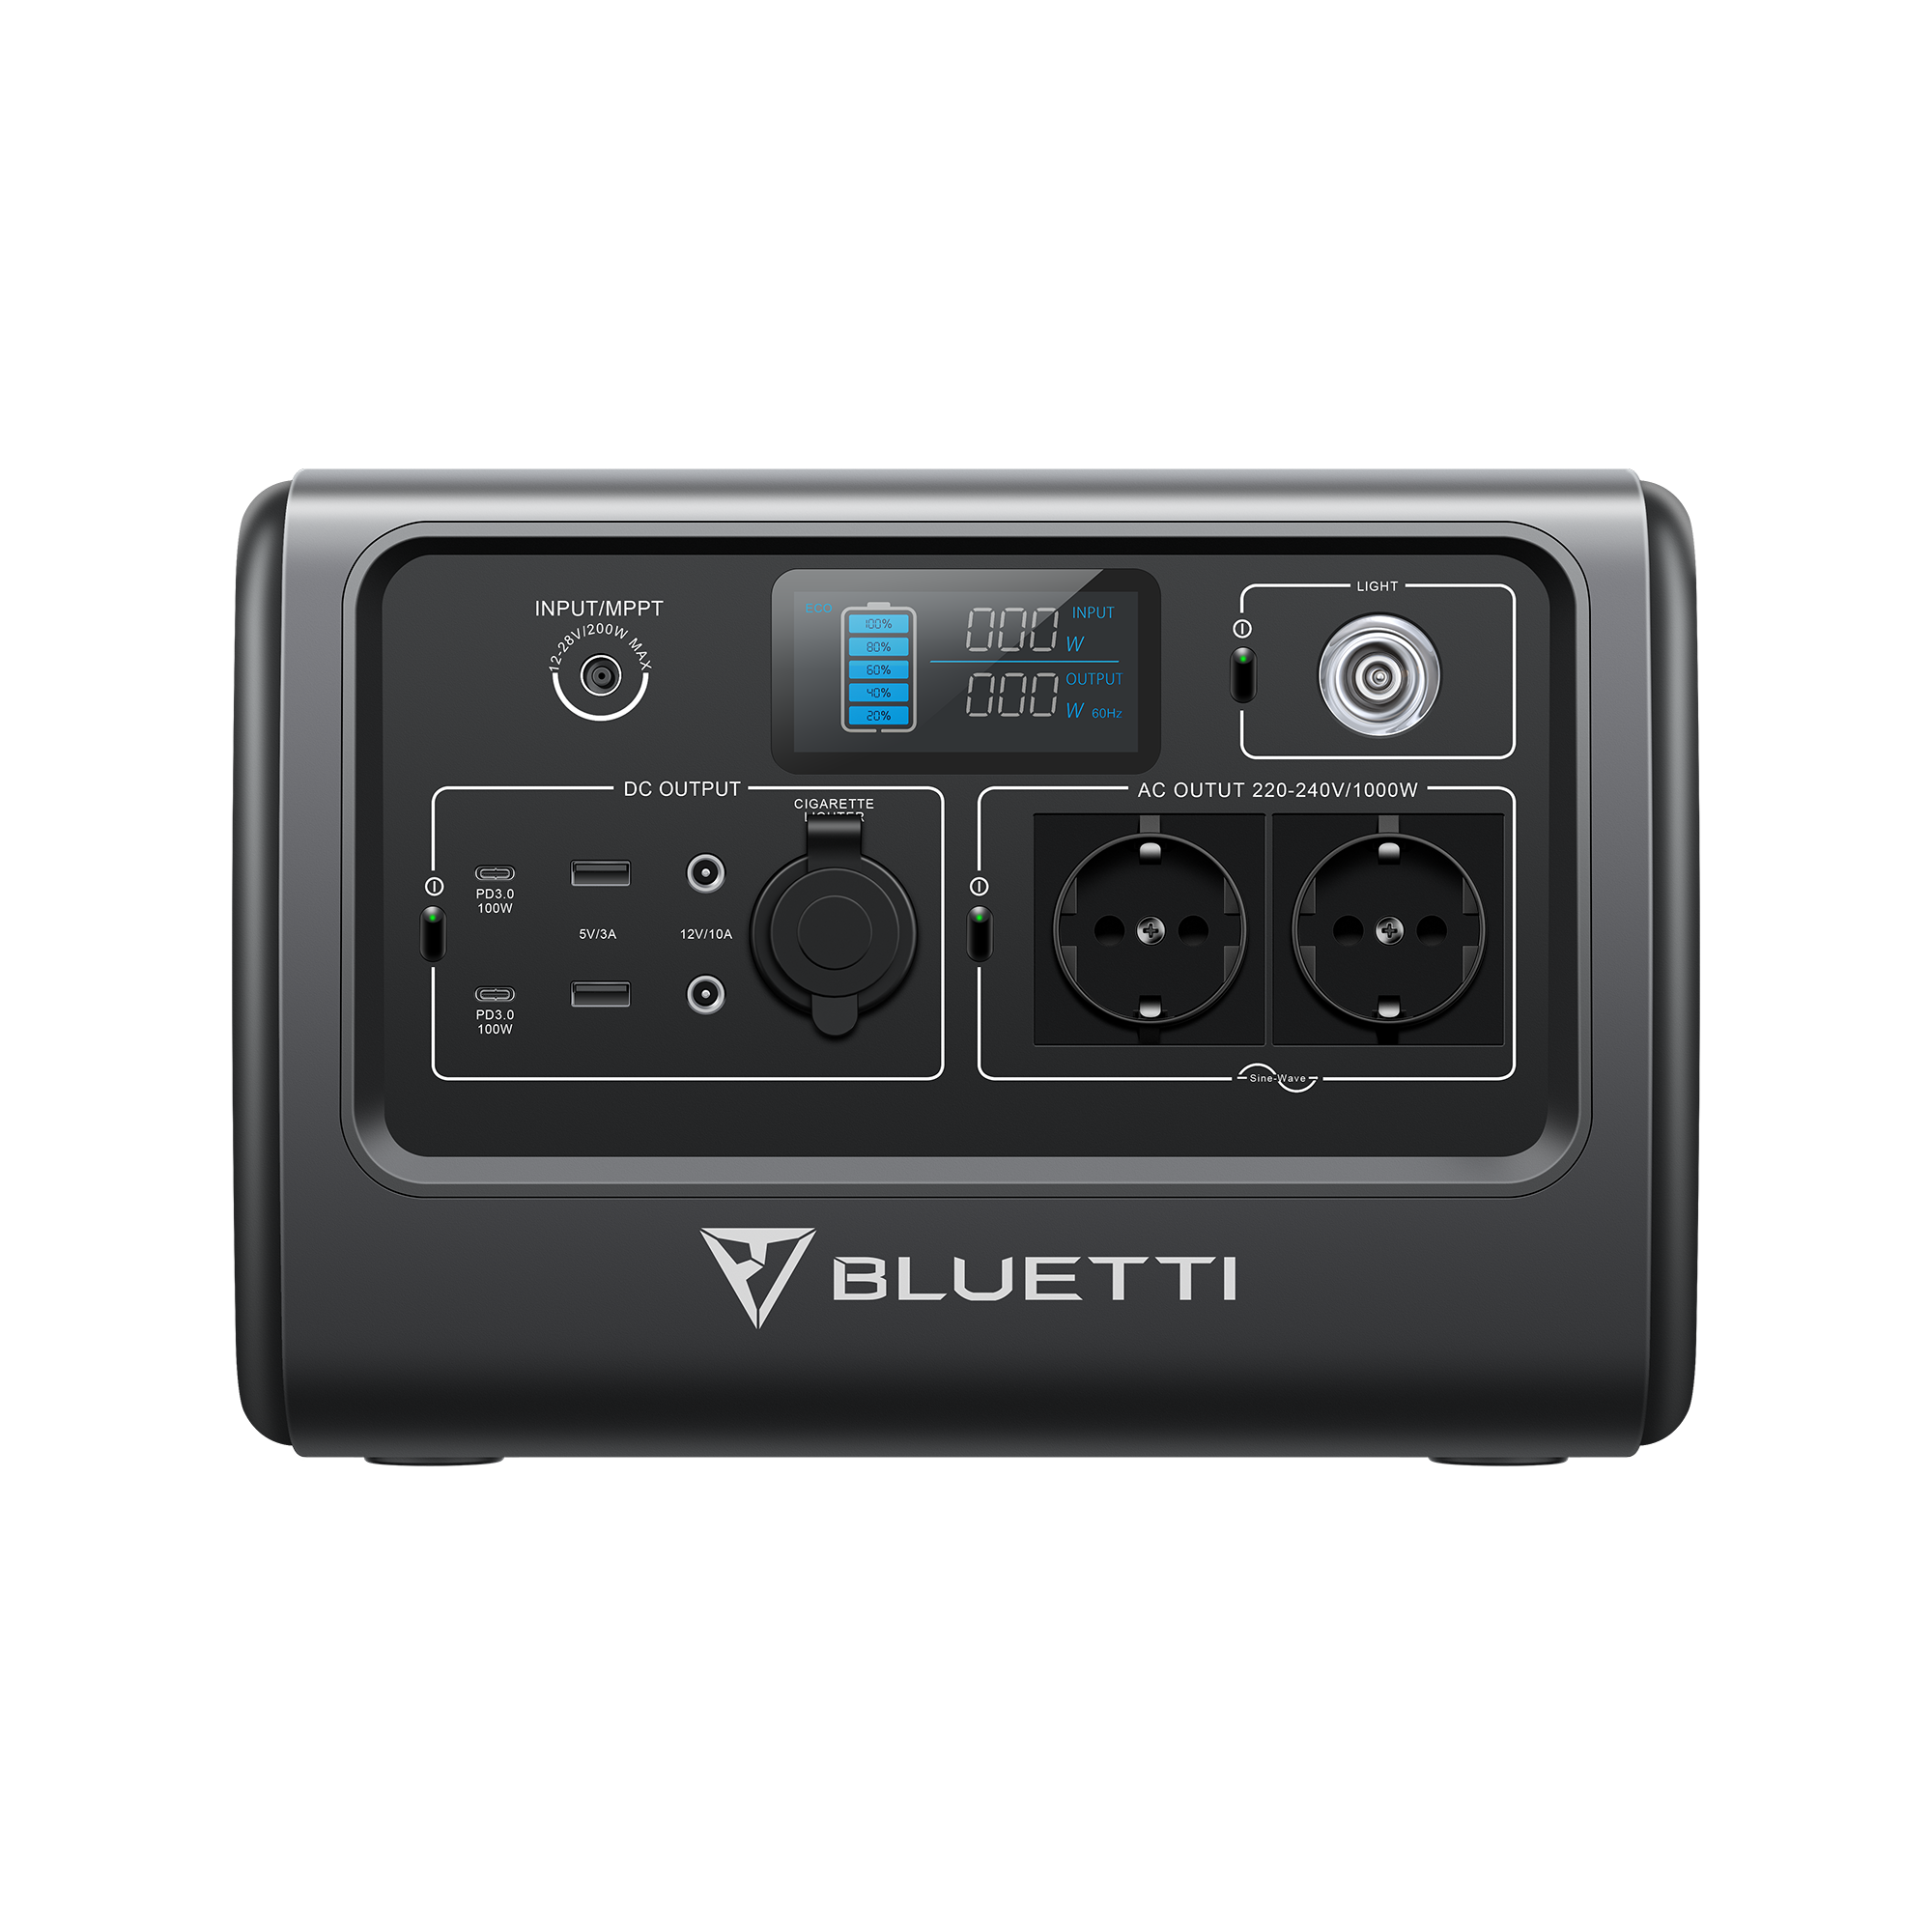 Bluetti EB70 1000W 716 Wh Portable Power Station - Powerful and Portable Energy